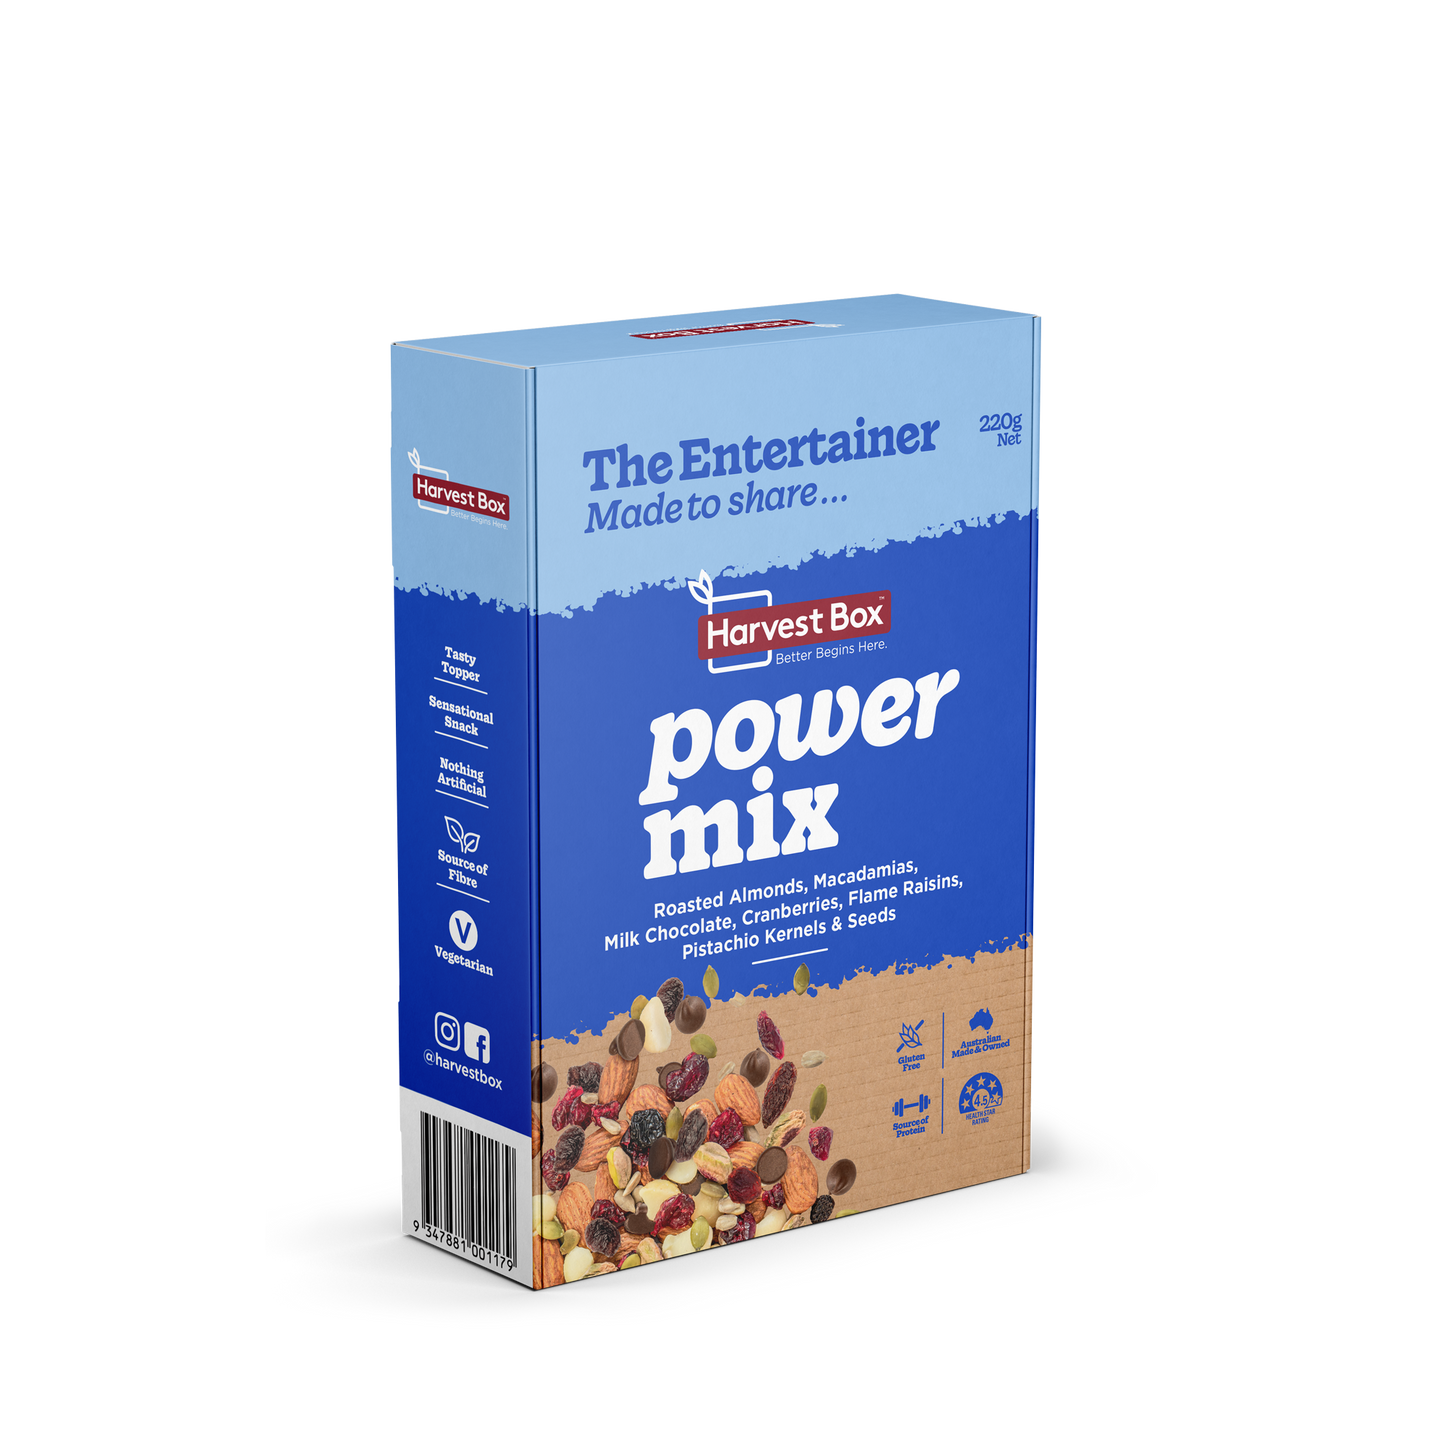 NEW - THE ENTERTAINER - POWER MIX 220g